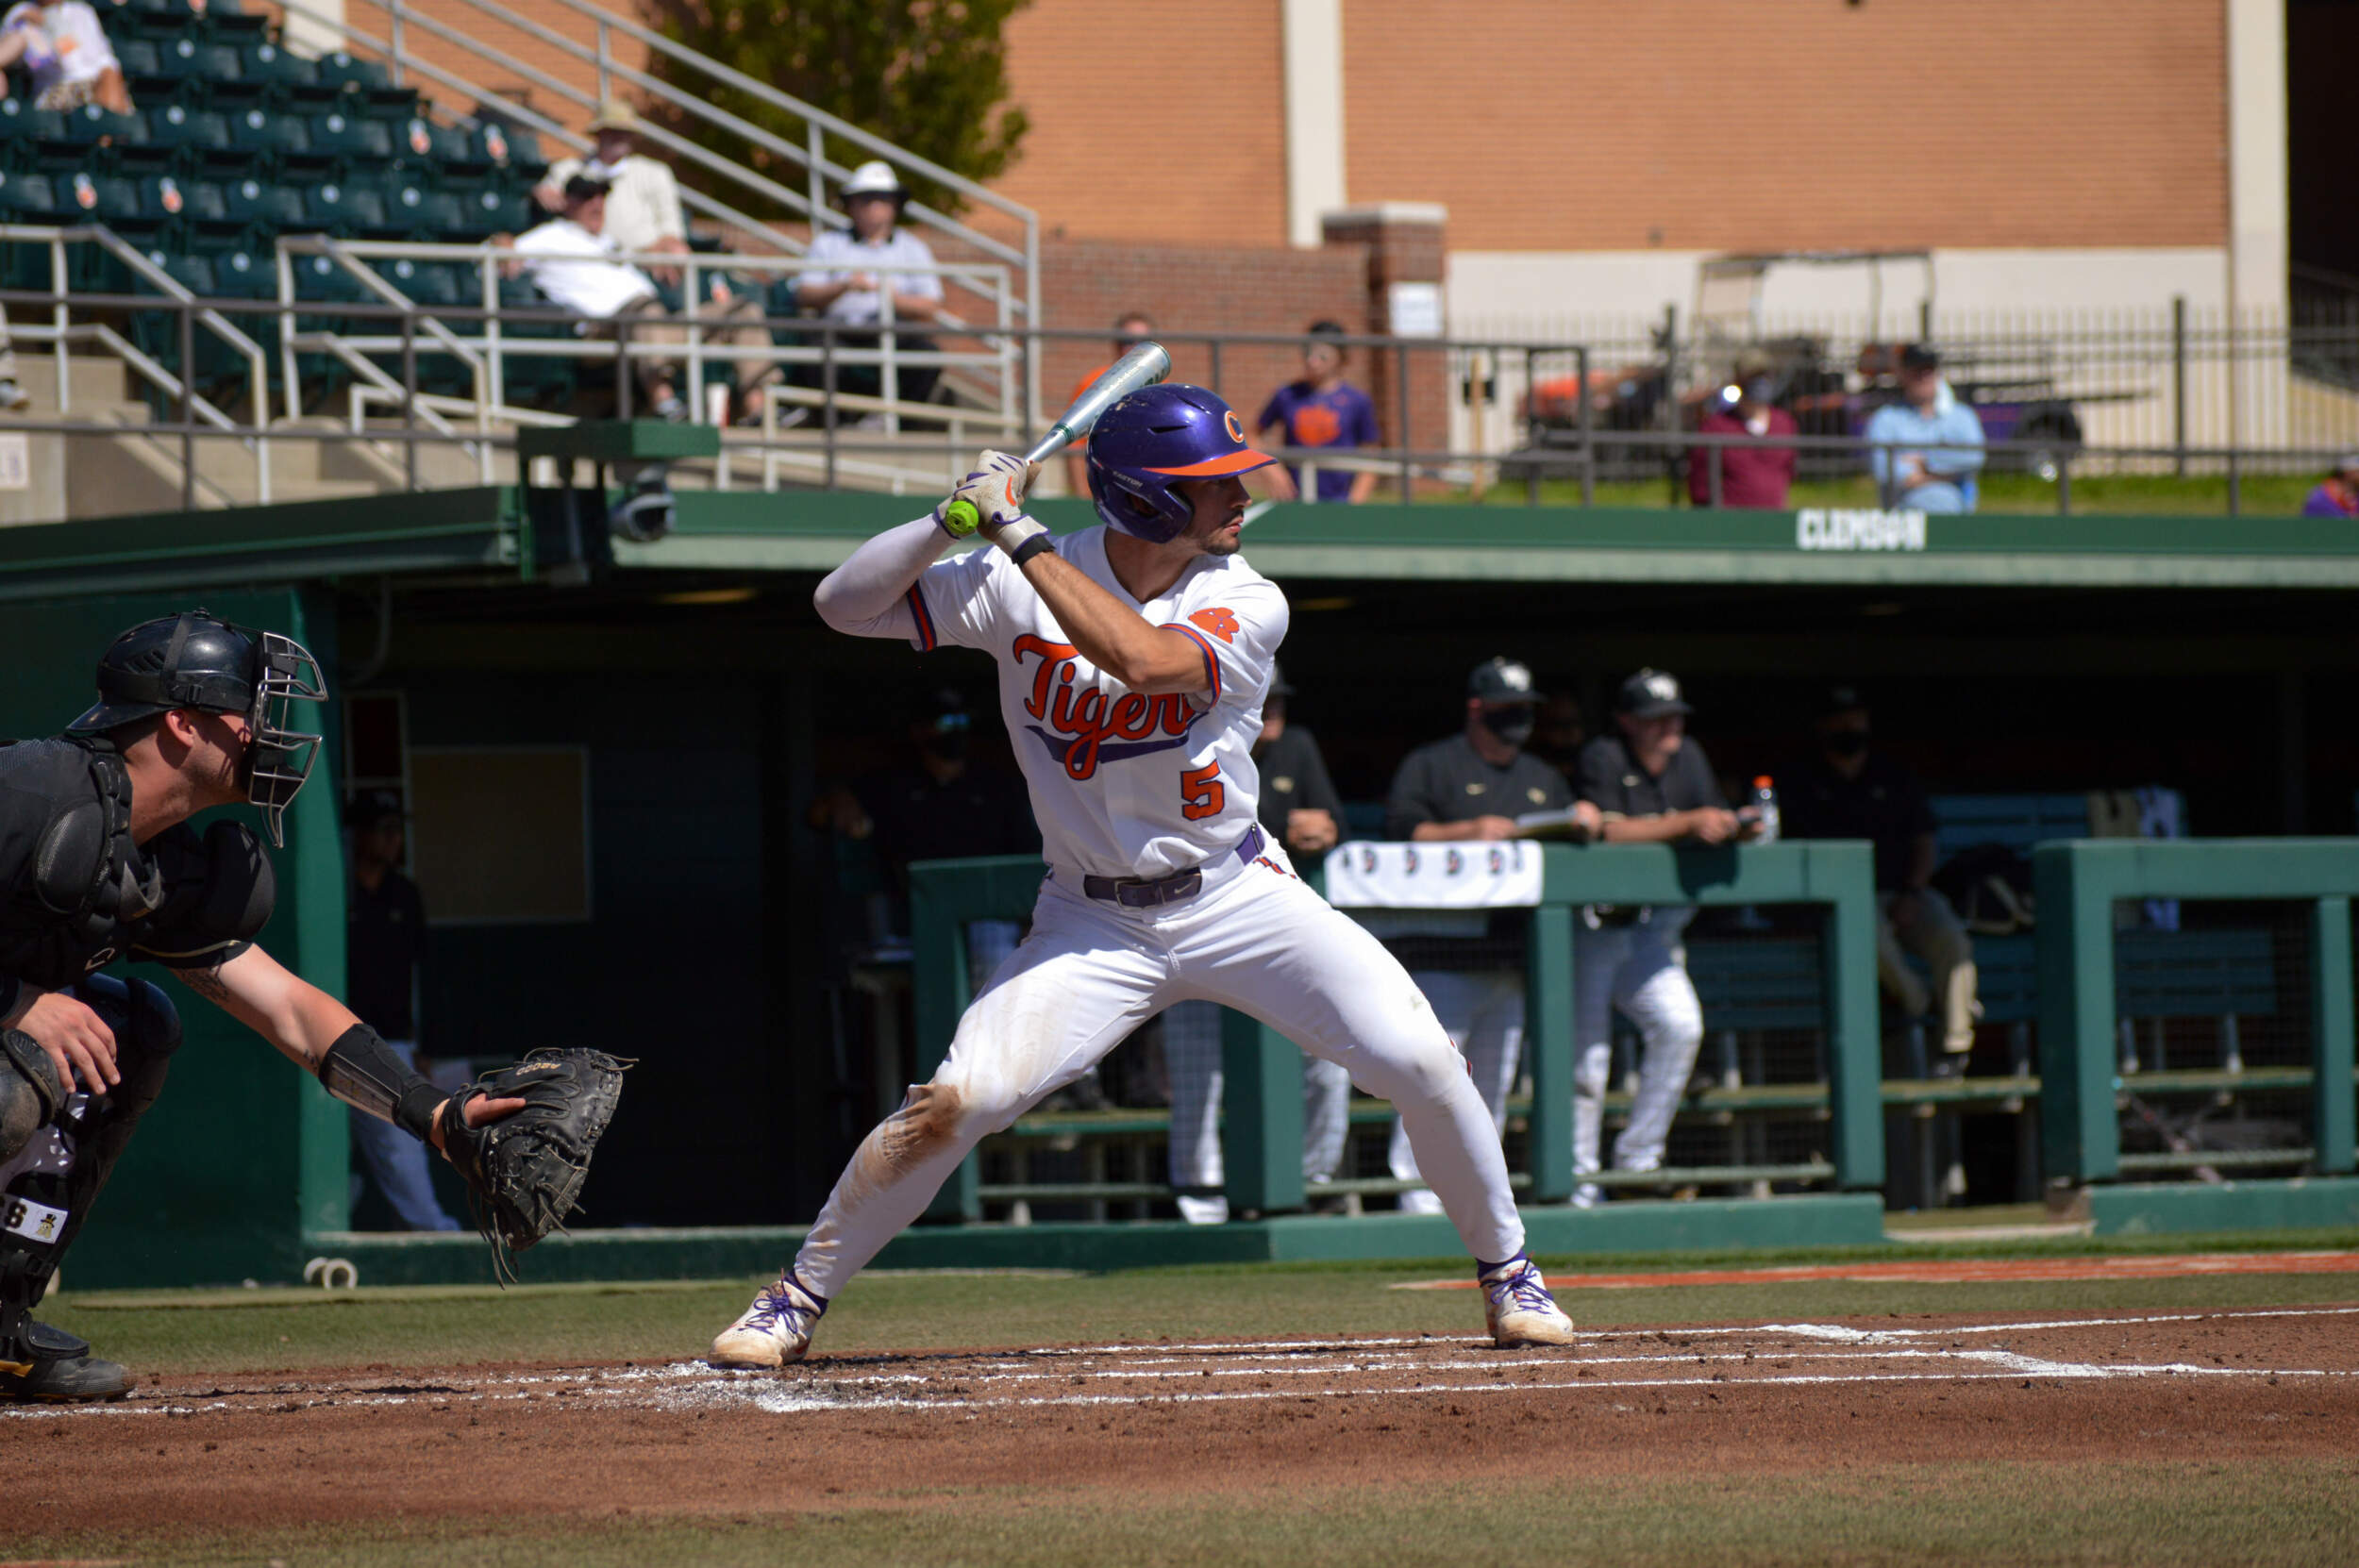 Clemson Baseball sweeps Wake Forest in second game of doubleheader